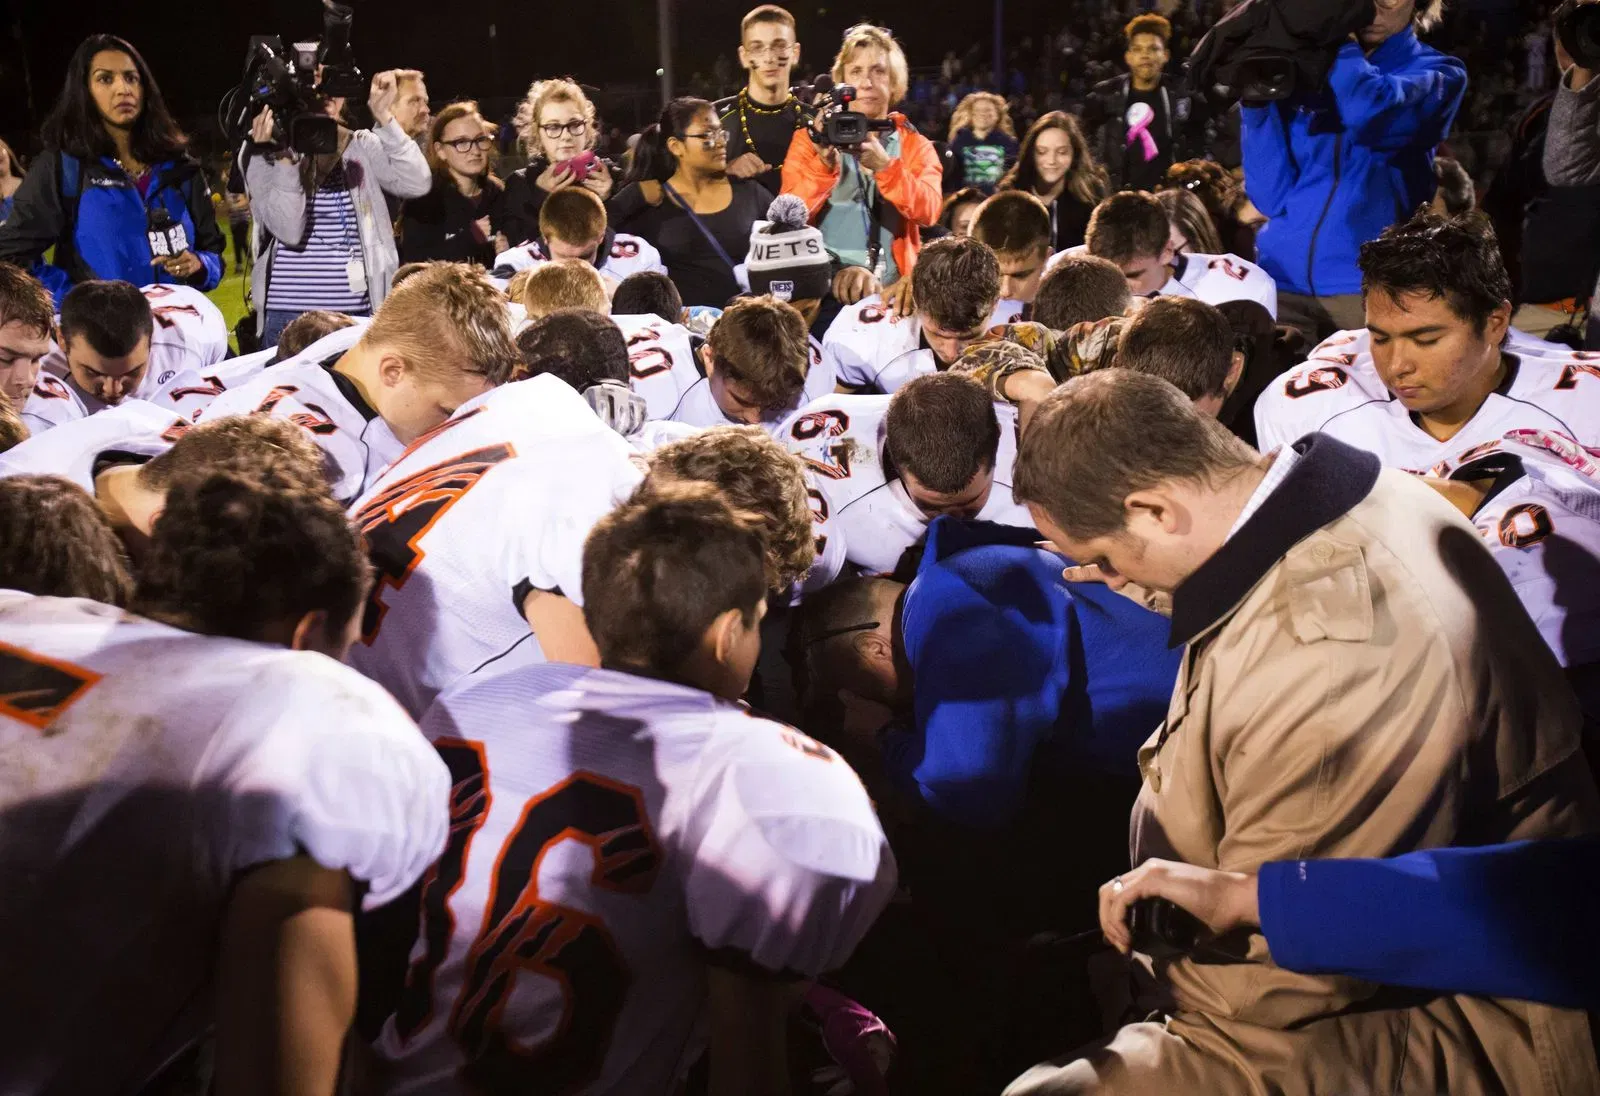 Football Coach Fired for Praying on Field Expected Back for 2023 Season